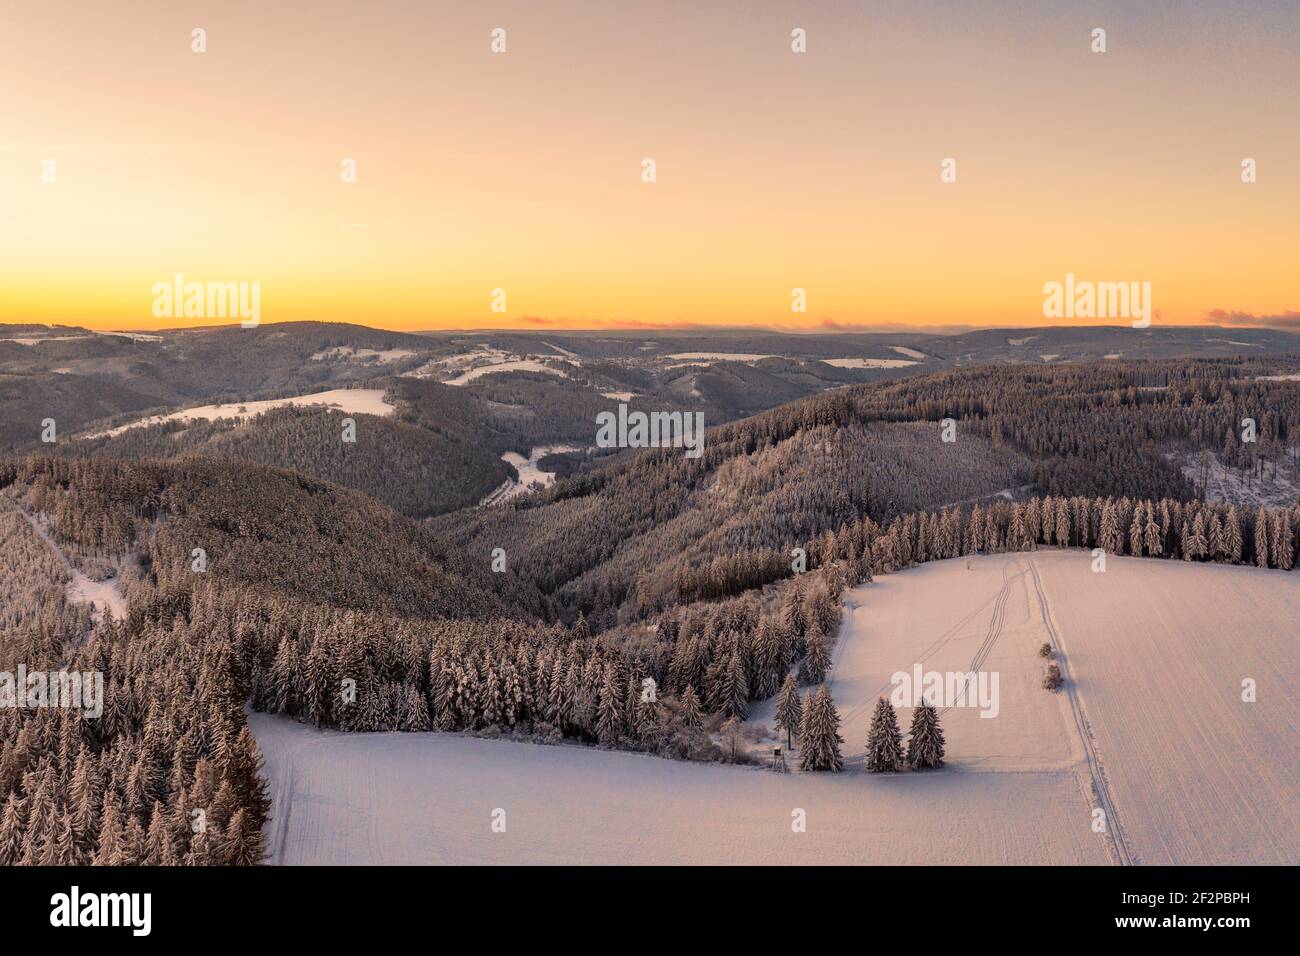 Germany, Thuringia, Grossbreitenbach, Allersdorf, valleys, forest, mountains, fields, snow, shortly before sunrise Stock Photo